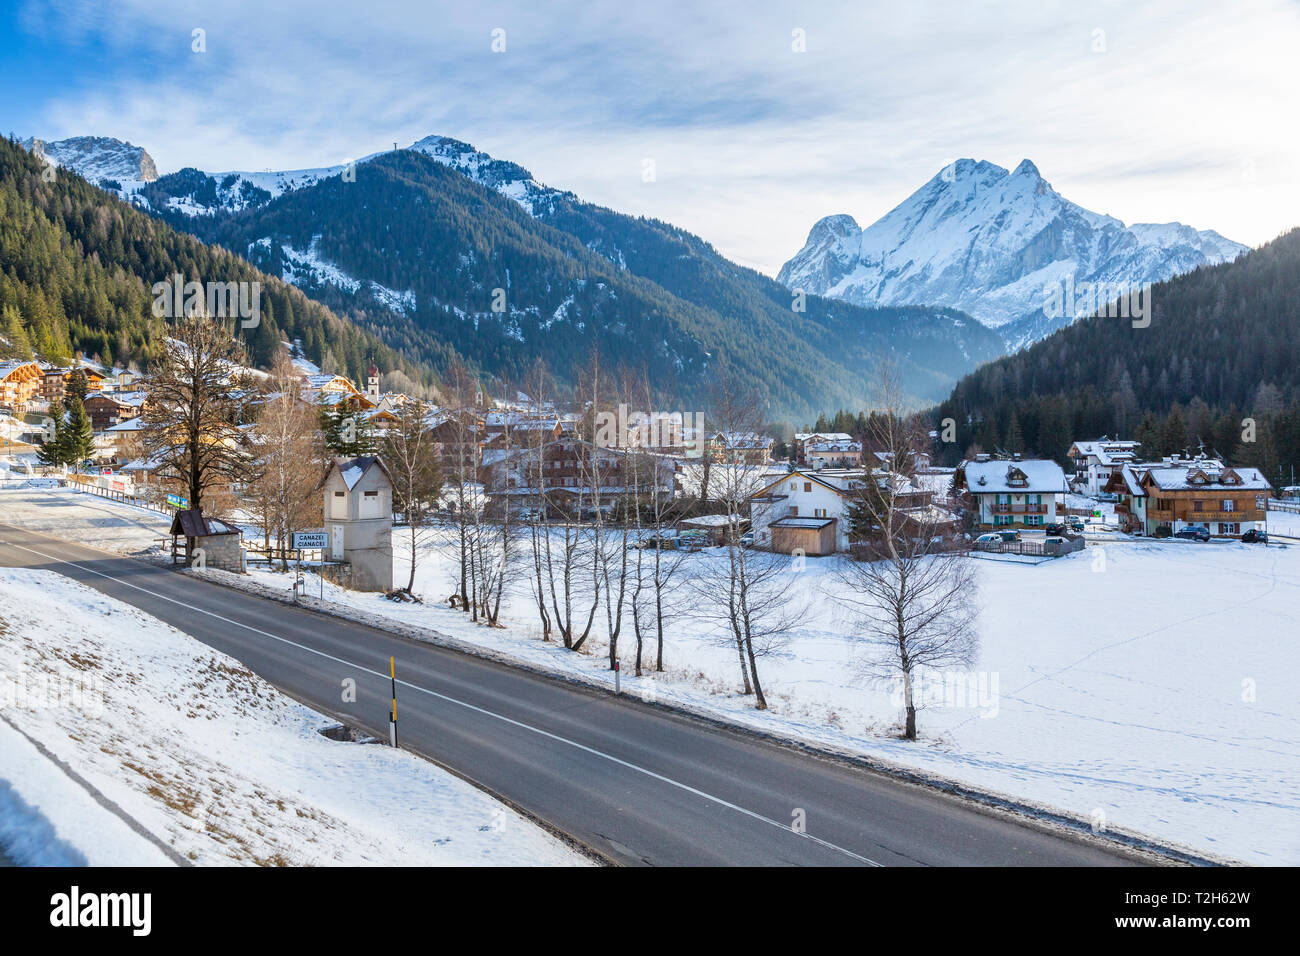 Landscape of Canazei during winter in Italy, Europe Stock Photo